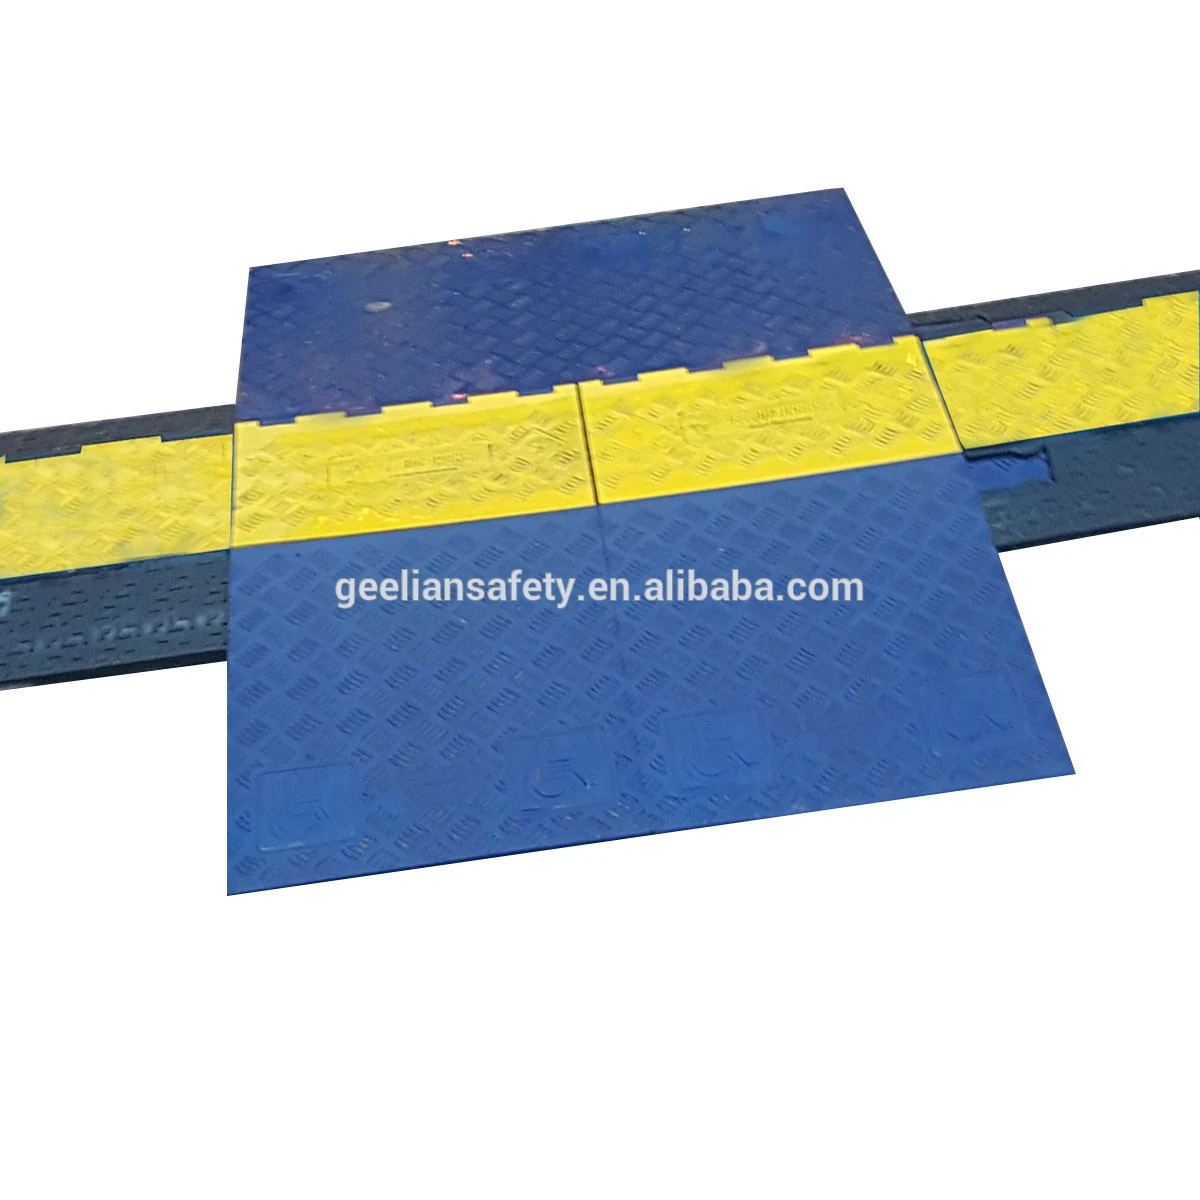 Low Price Flexible Dual Channel Floor Cord Cover/Rubber Cable Tray/Cable Cover Ramp